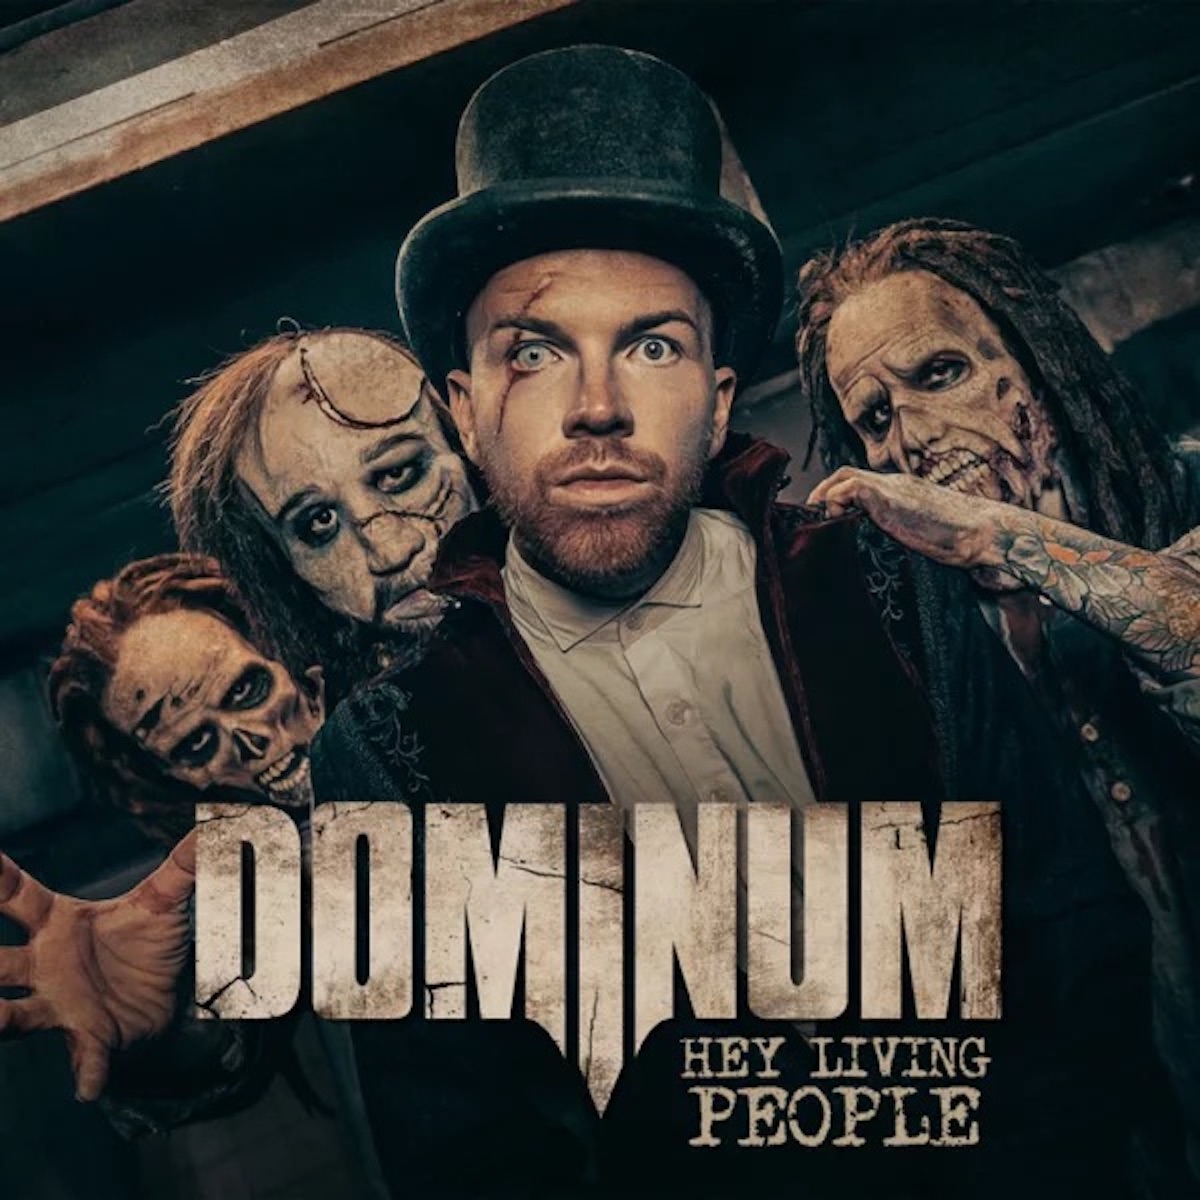 DEBUT ALBUM REVIEW: Hey Living People by Dominum